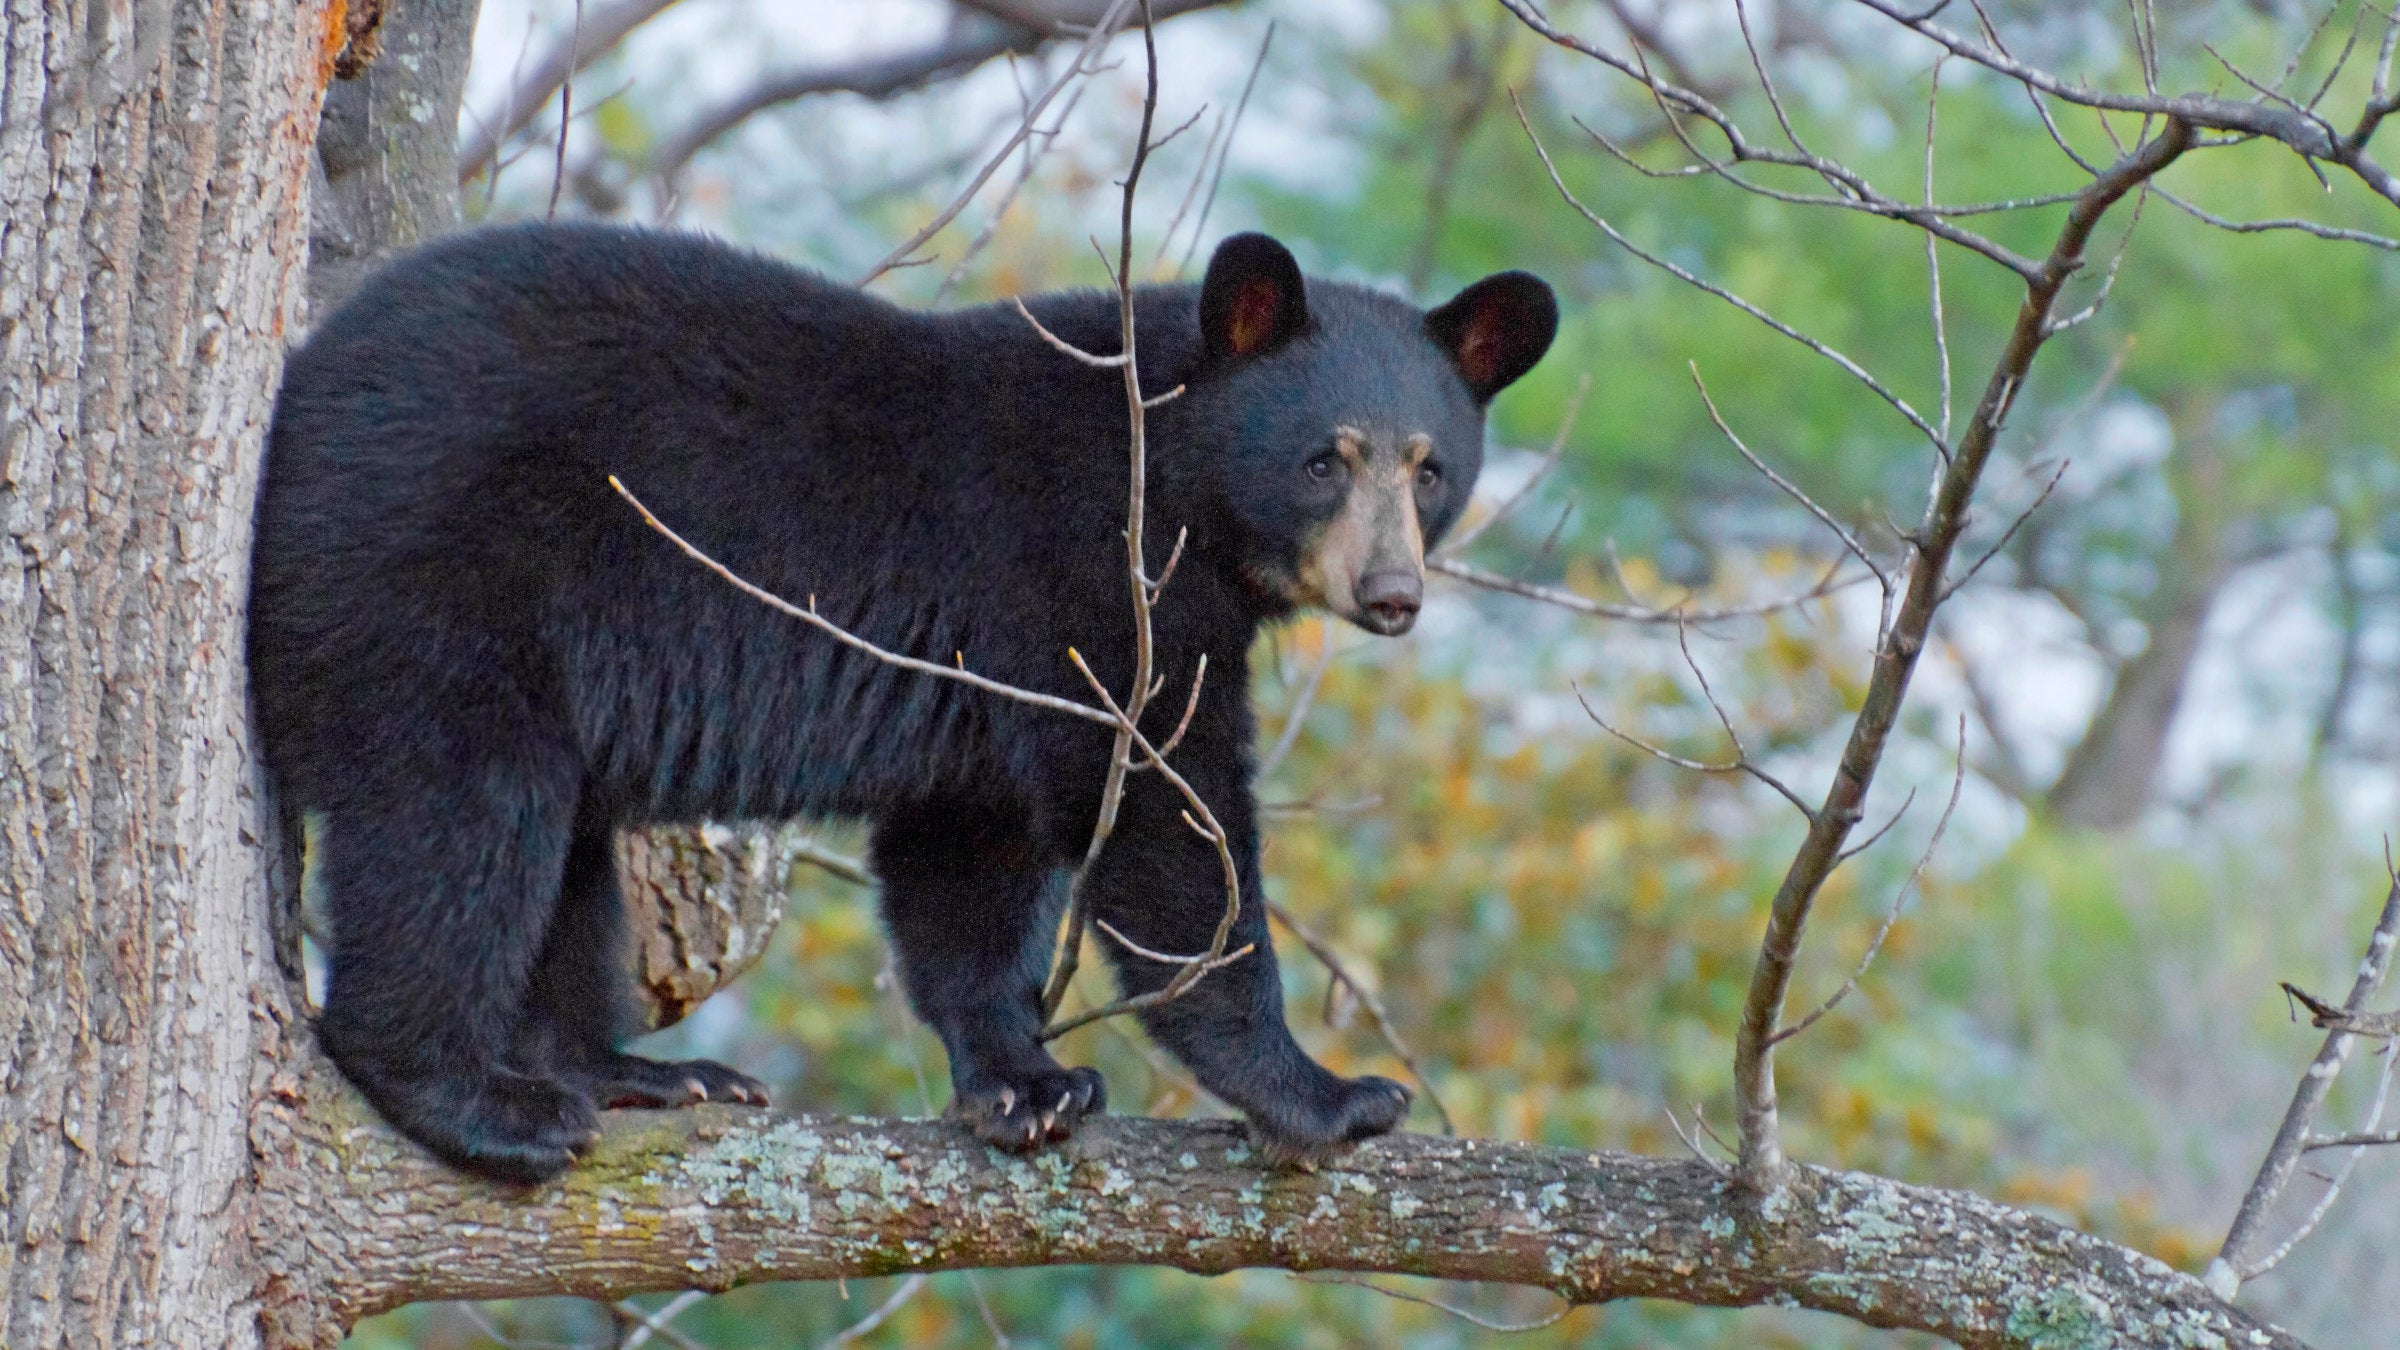 Ineffective & outdated: Six reasons to not hang a bear bag